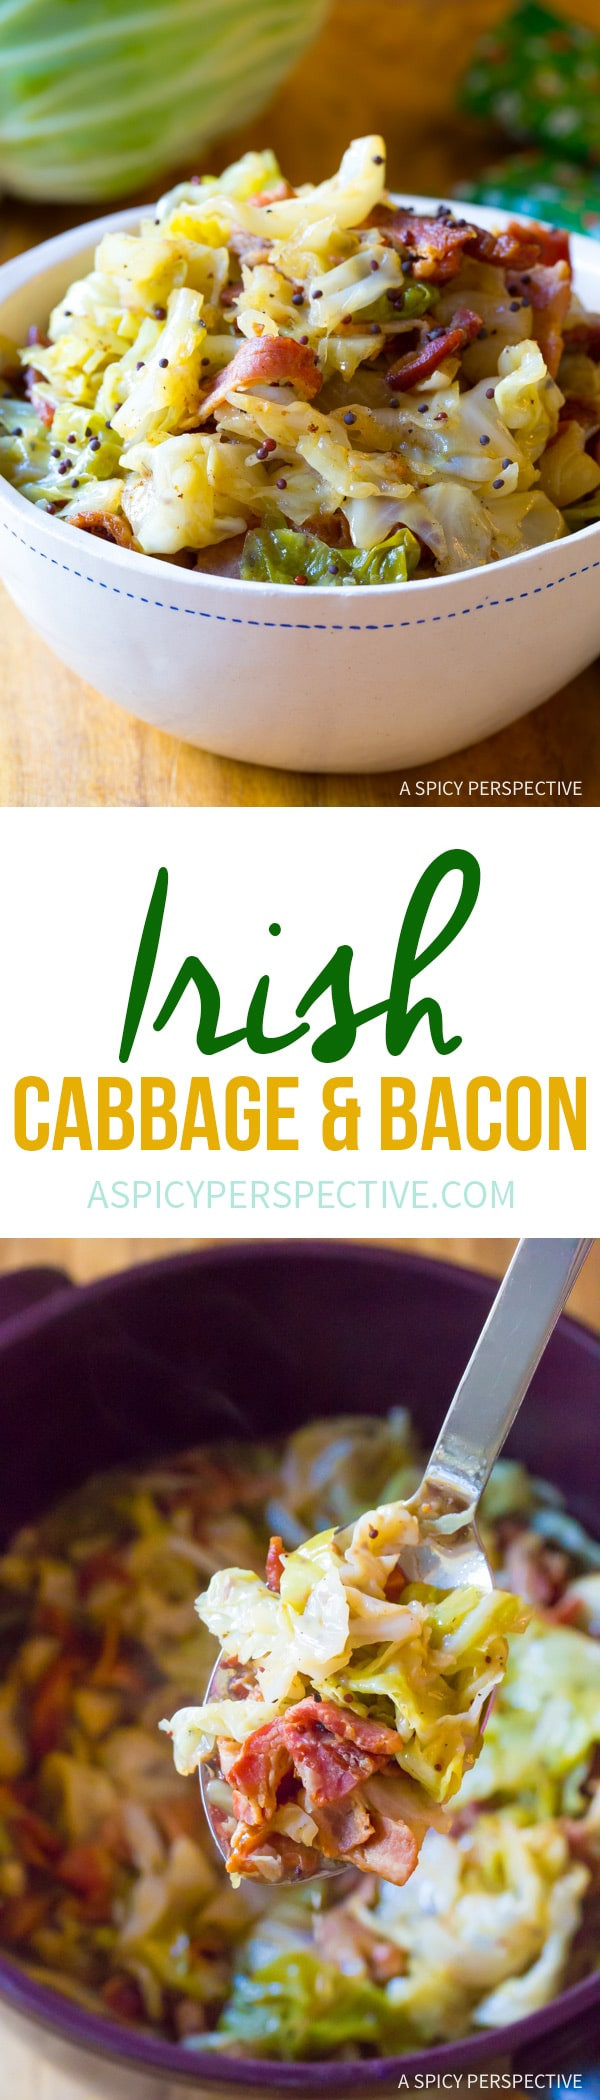 St Patrick's Day Cabbage Recipe
 Irish Cabbage and Bacon A Spicy Perspective